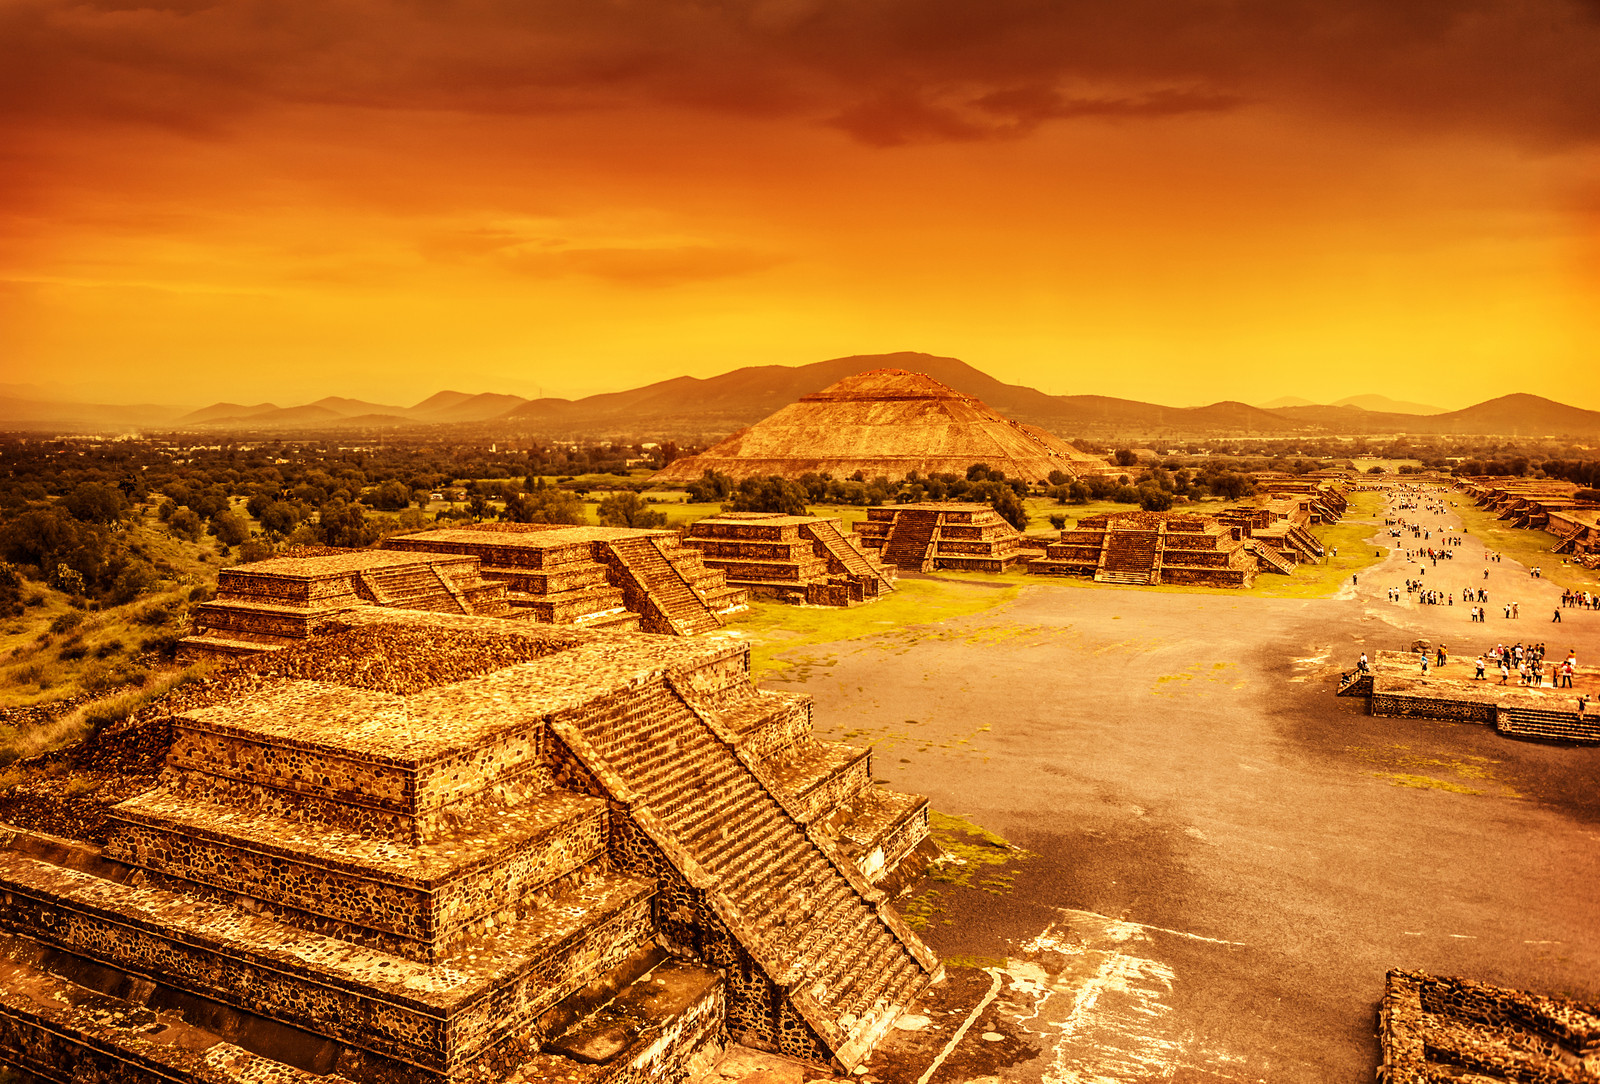 A photograph of the ancient city of Teotihuacan